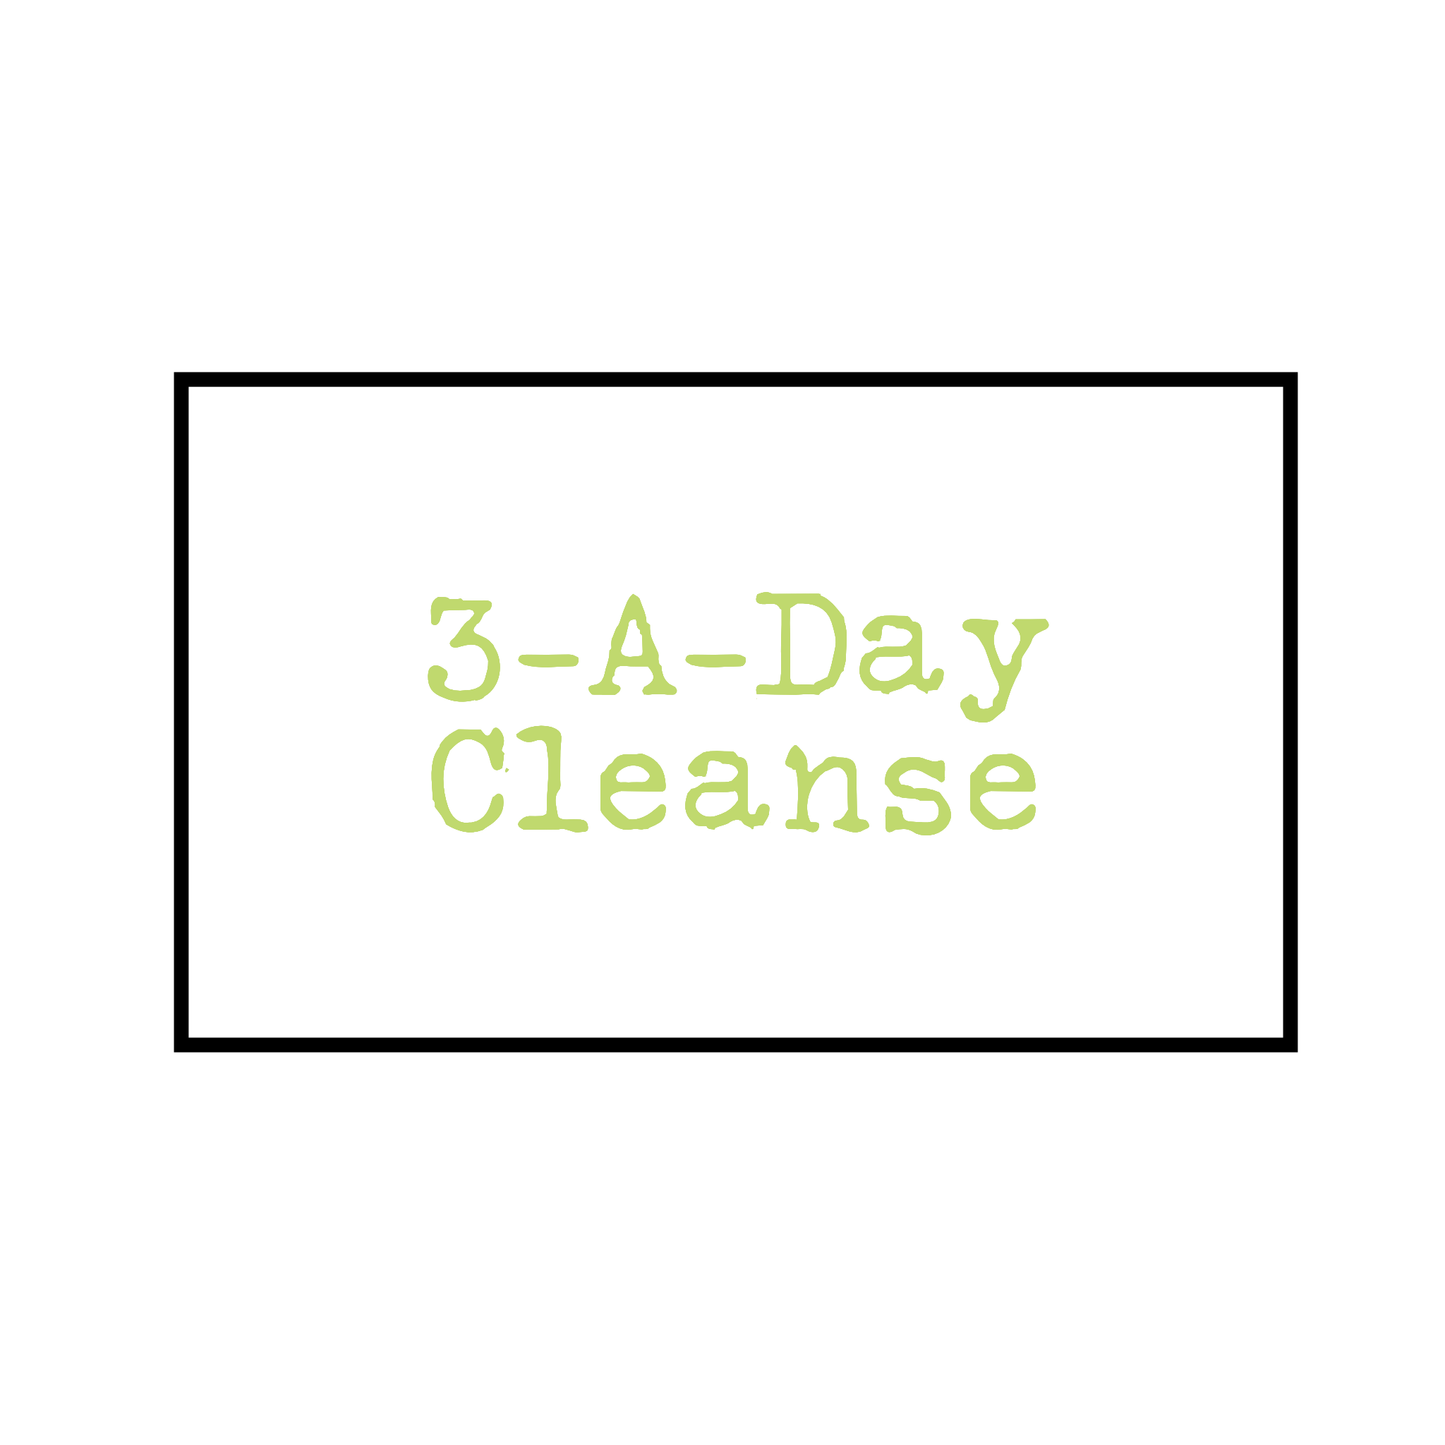 3-A-Day Cleanse